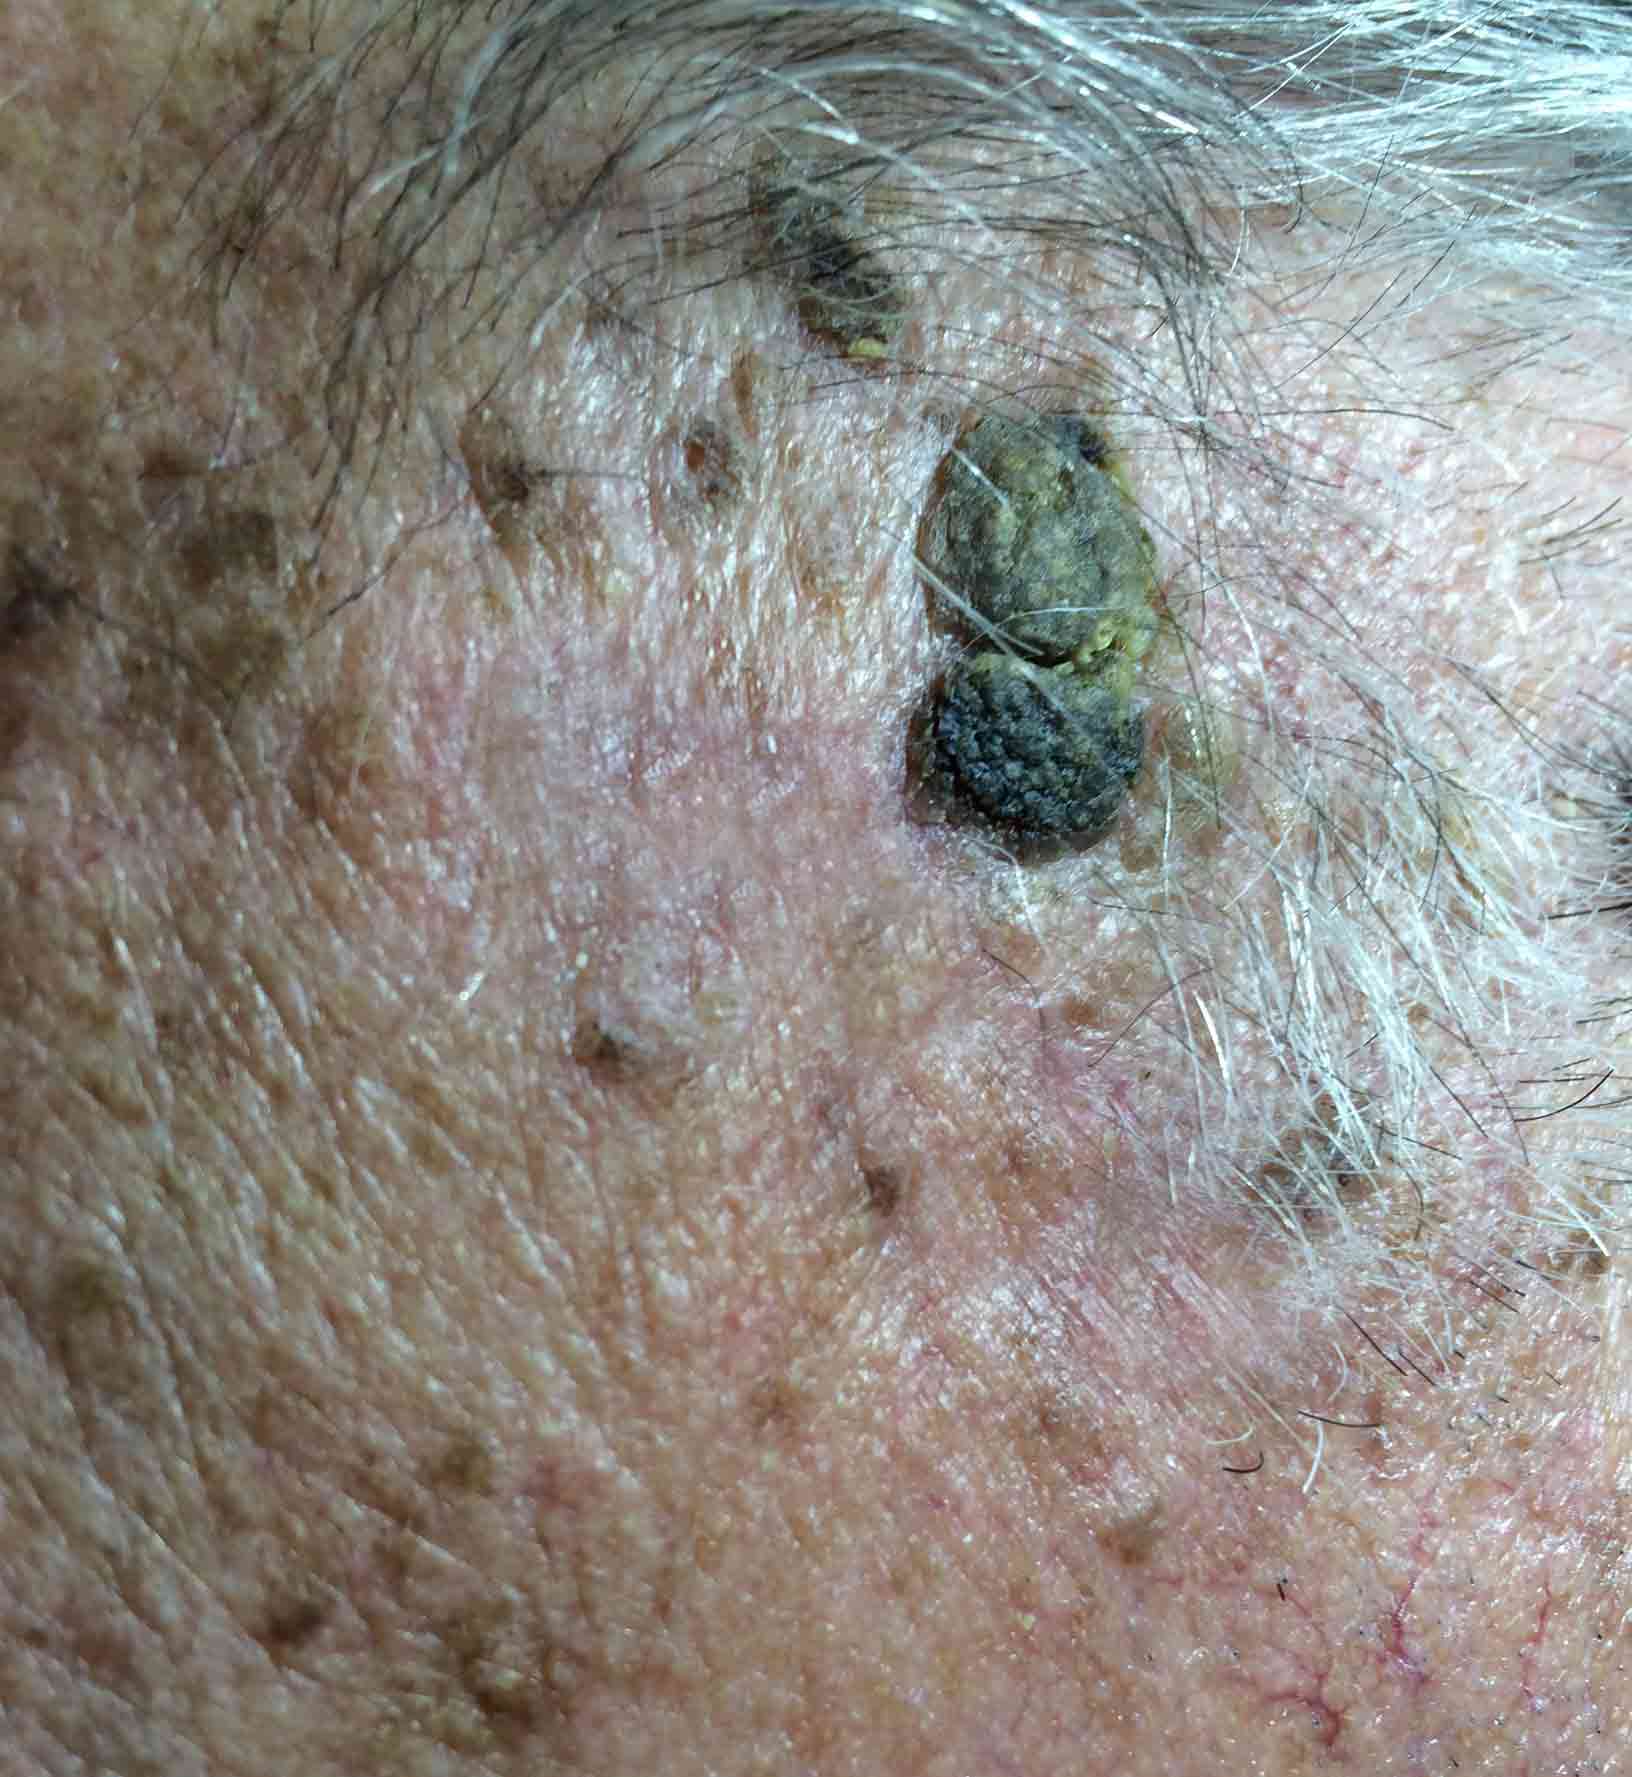 wart cancerous skin tags pictures